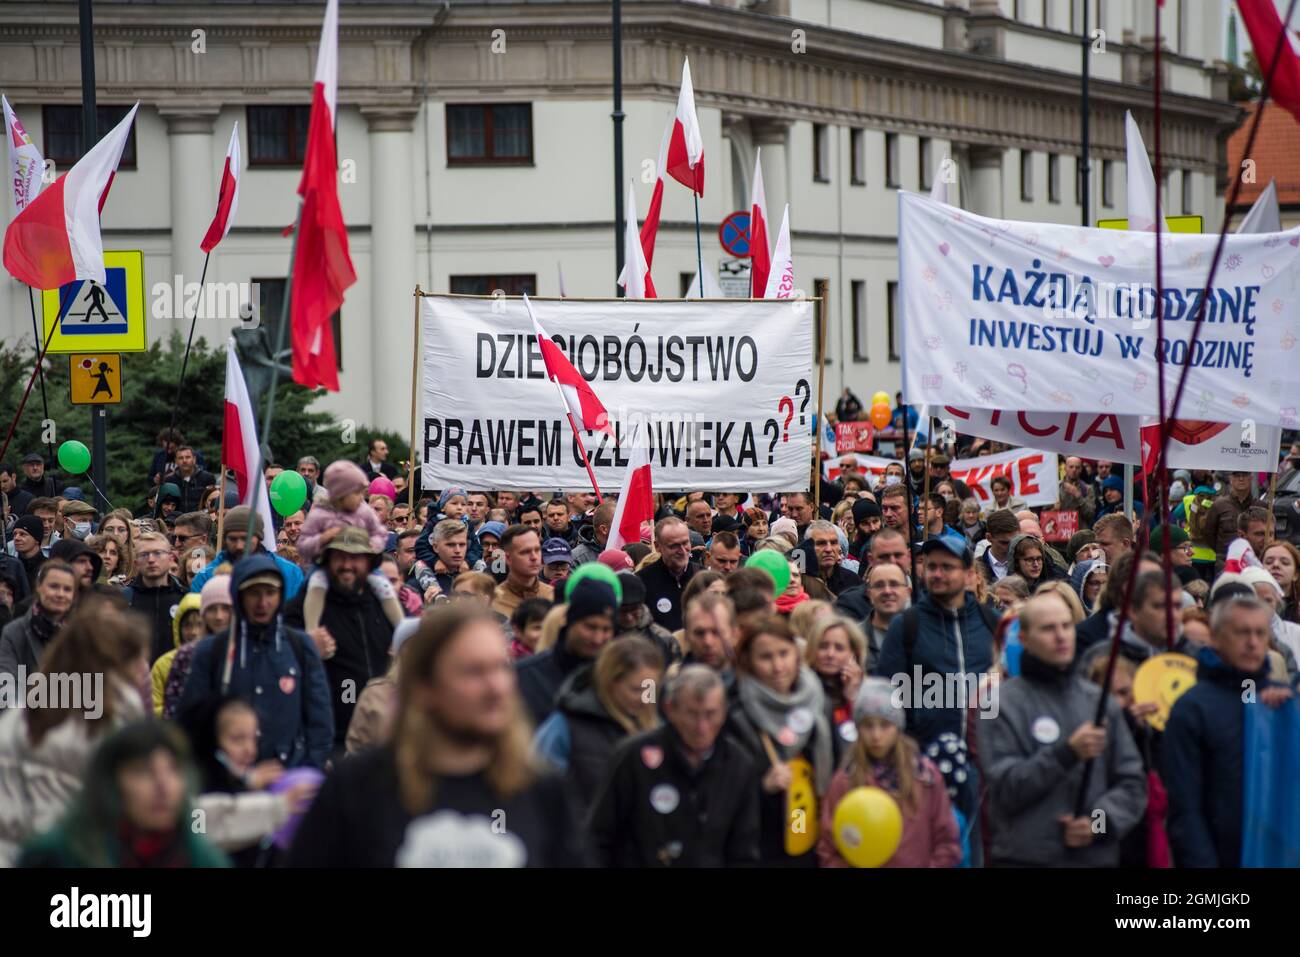 Warsaw, Poland. 19th Sep, 2021. Marchers wave flags during the rally in Warsaw.Thousands of people took part in the XVI National March of Life and Family (Narodowy Marsz Zycia i Rodziny) in Warsaw which was held under the slogan 'Dad - be, lead, protect'. As the organizers of the event announced earlier, it was aimed at manifesting pro-family attitudes and pro-life values. The event's main organizer was the Center of Life and Family. (Photo by Attila Husejnow/SOPA Images/Sipa USA) Credit: Sipa USA/Alamy Live News Stock Photo